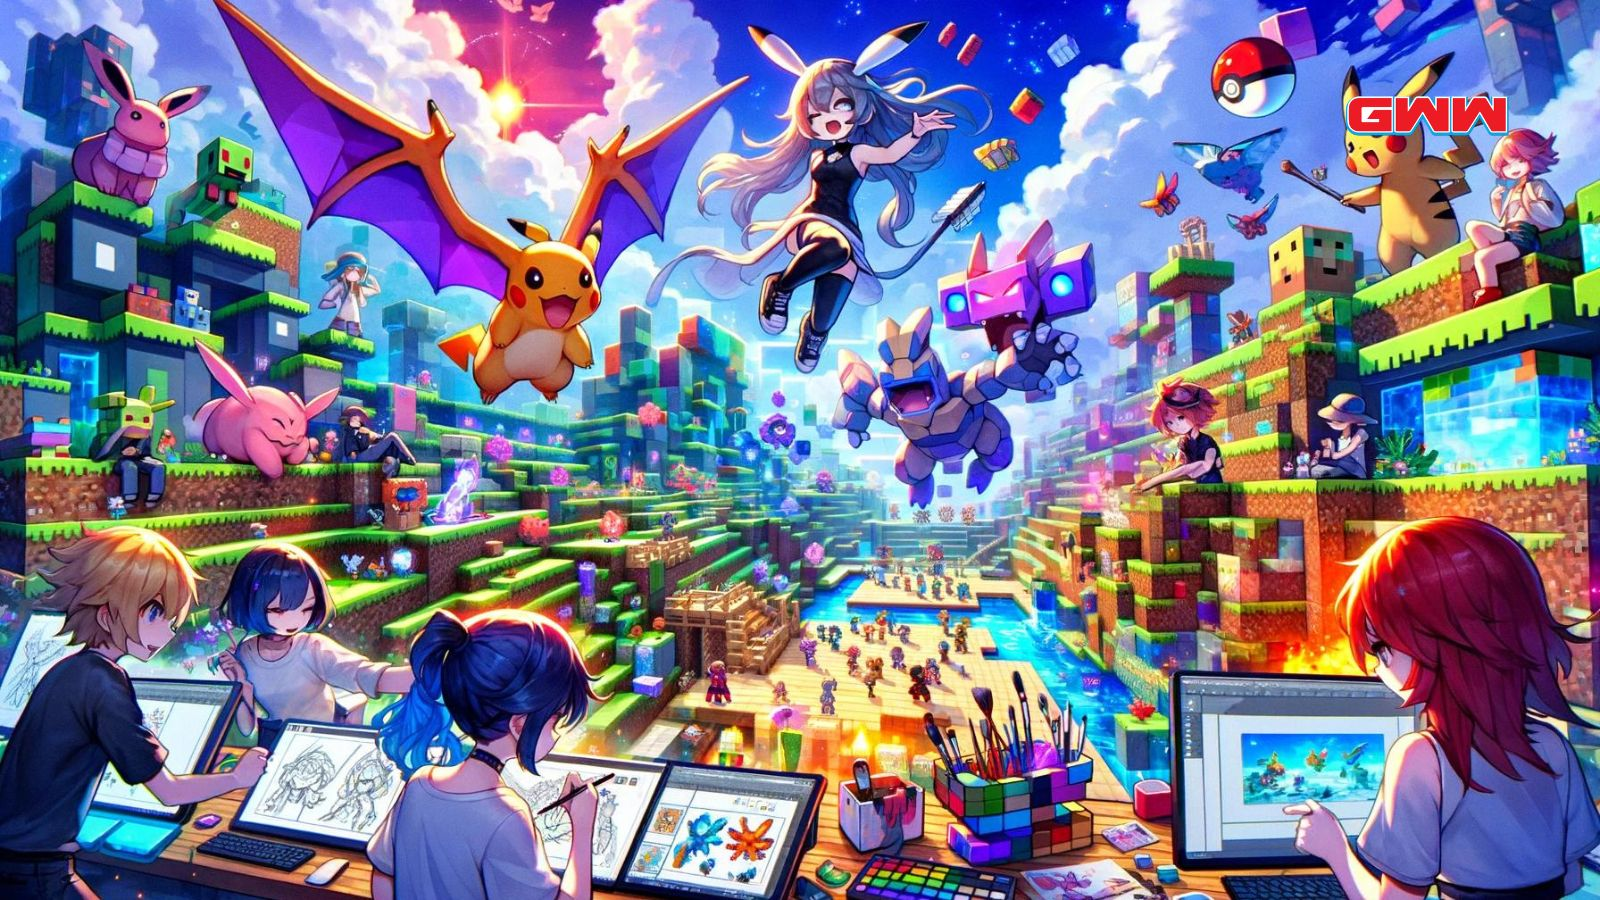 A vibrant scene showing the process of creating anime-style Pokémon in a virtual world.